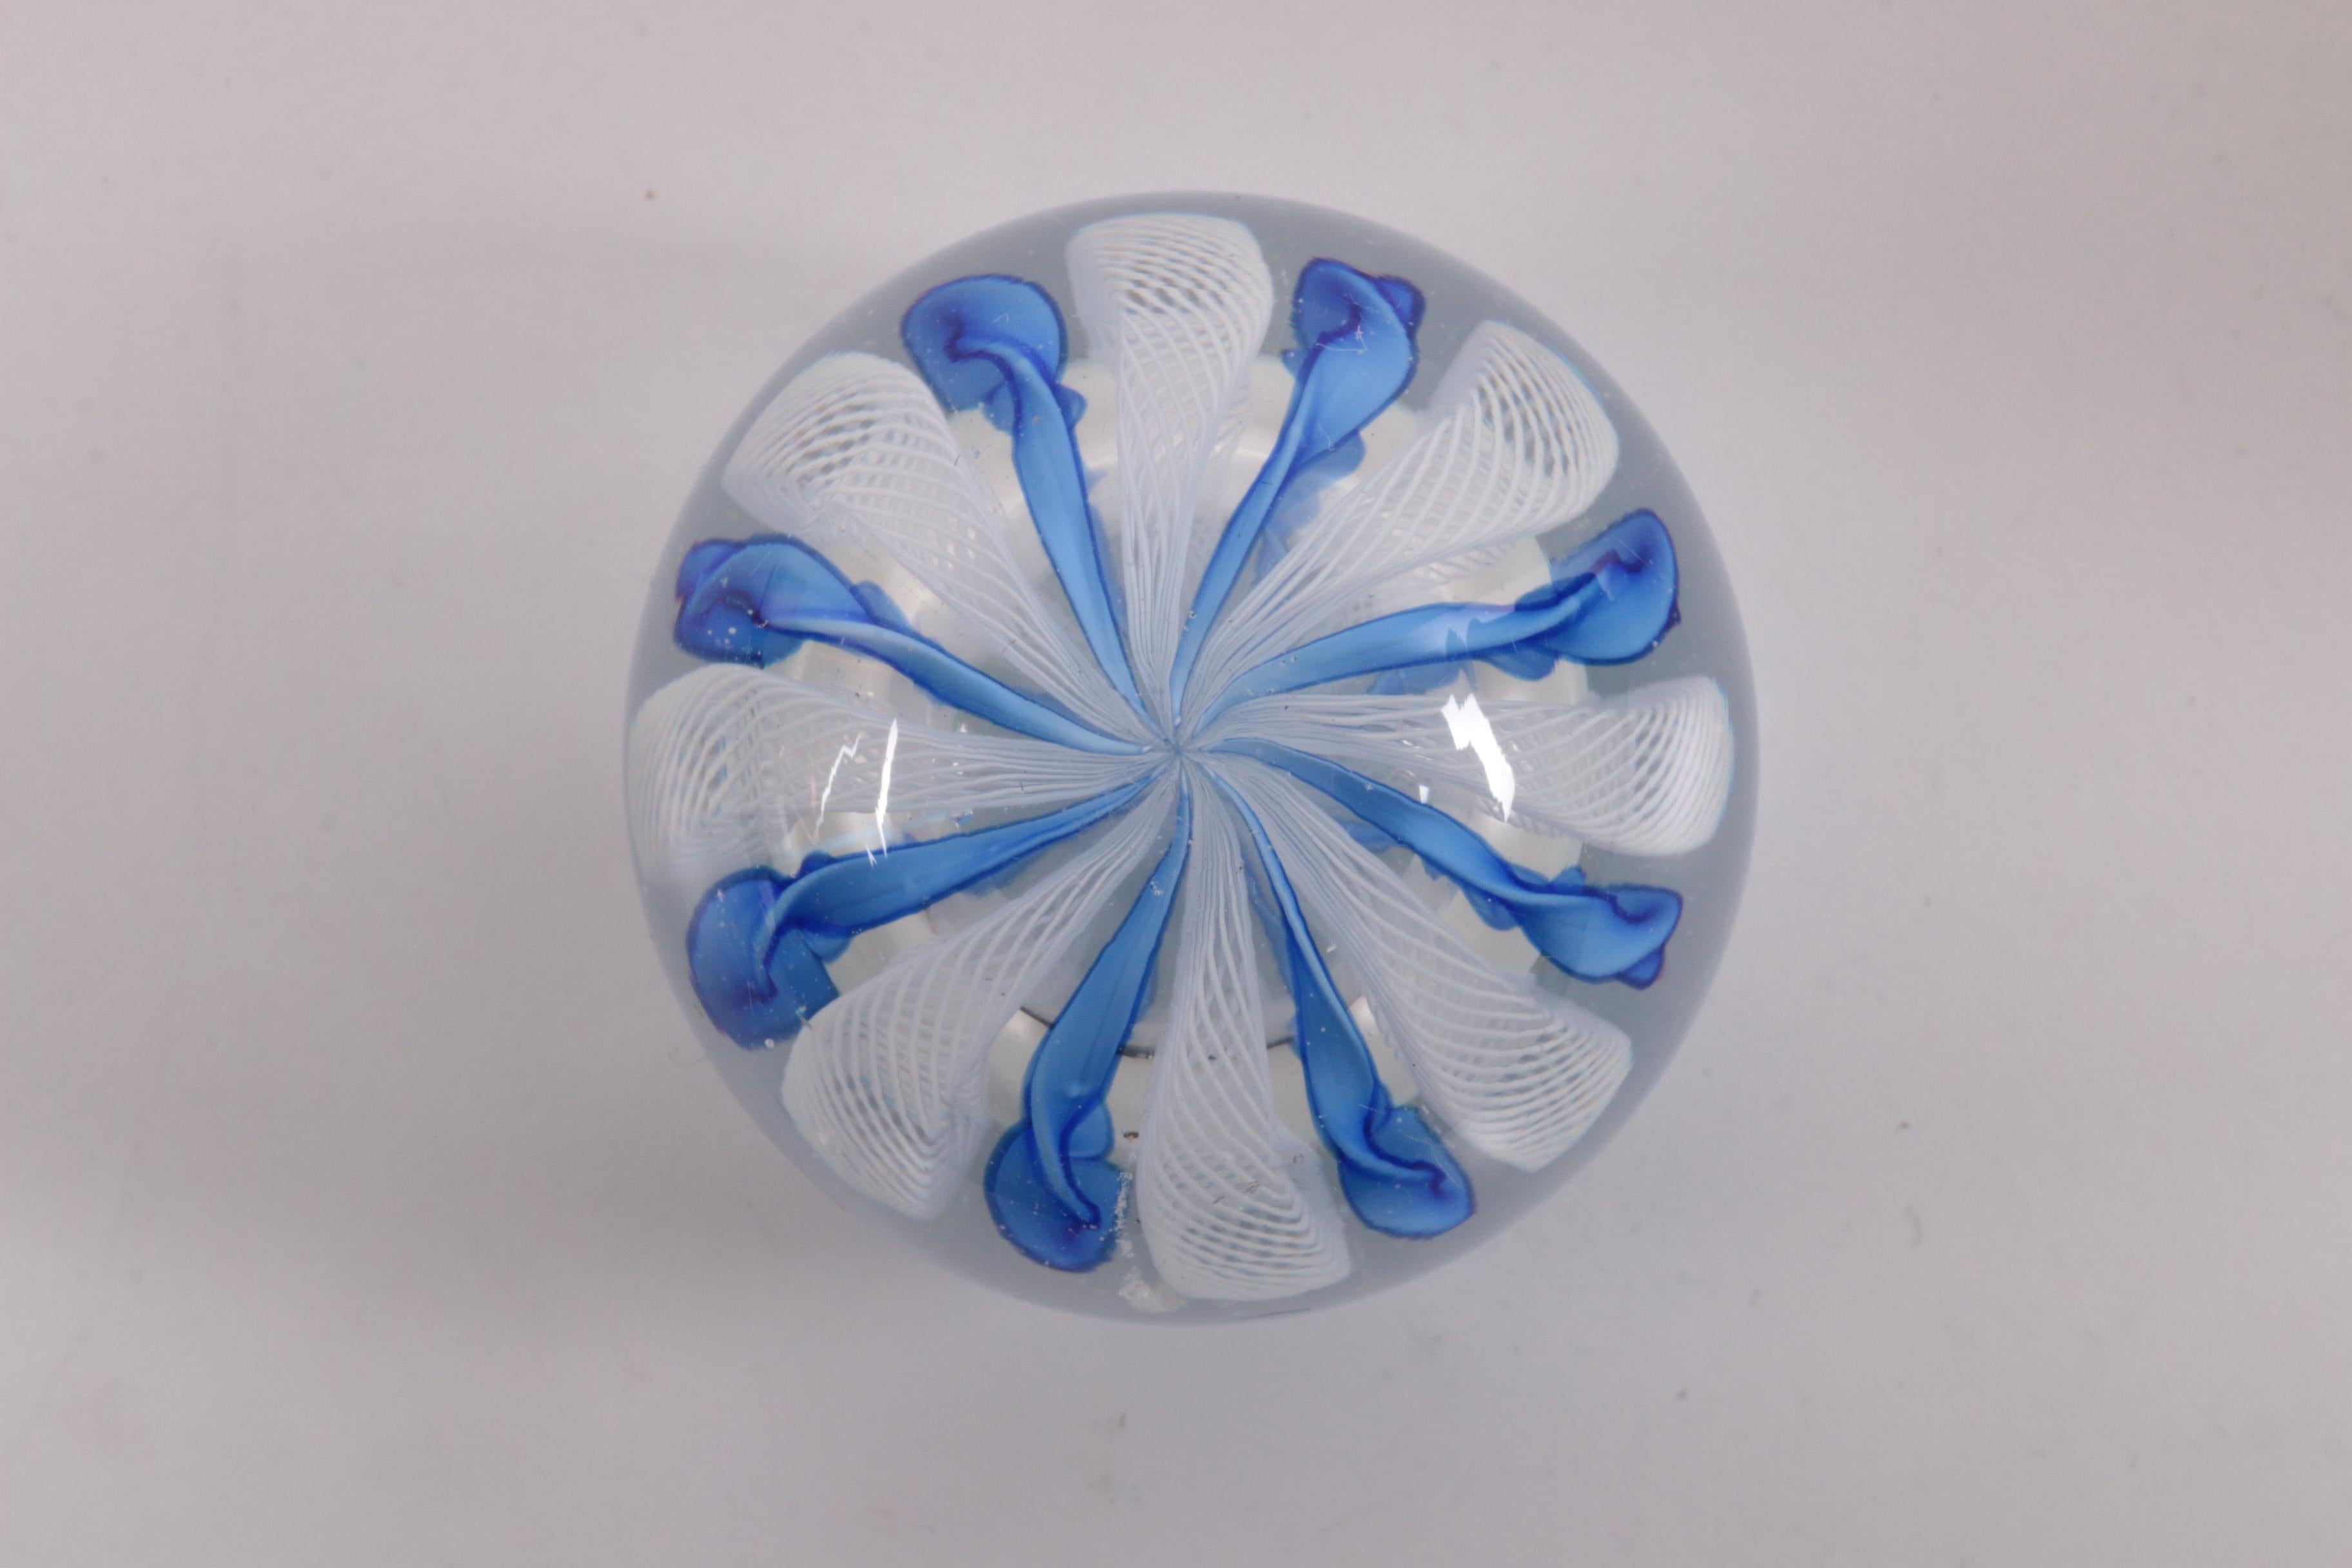 Art Glass Murano Paperweight with Blue and White Spirals, 1960